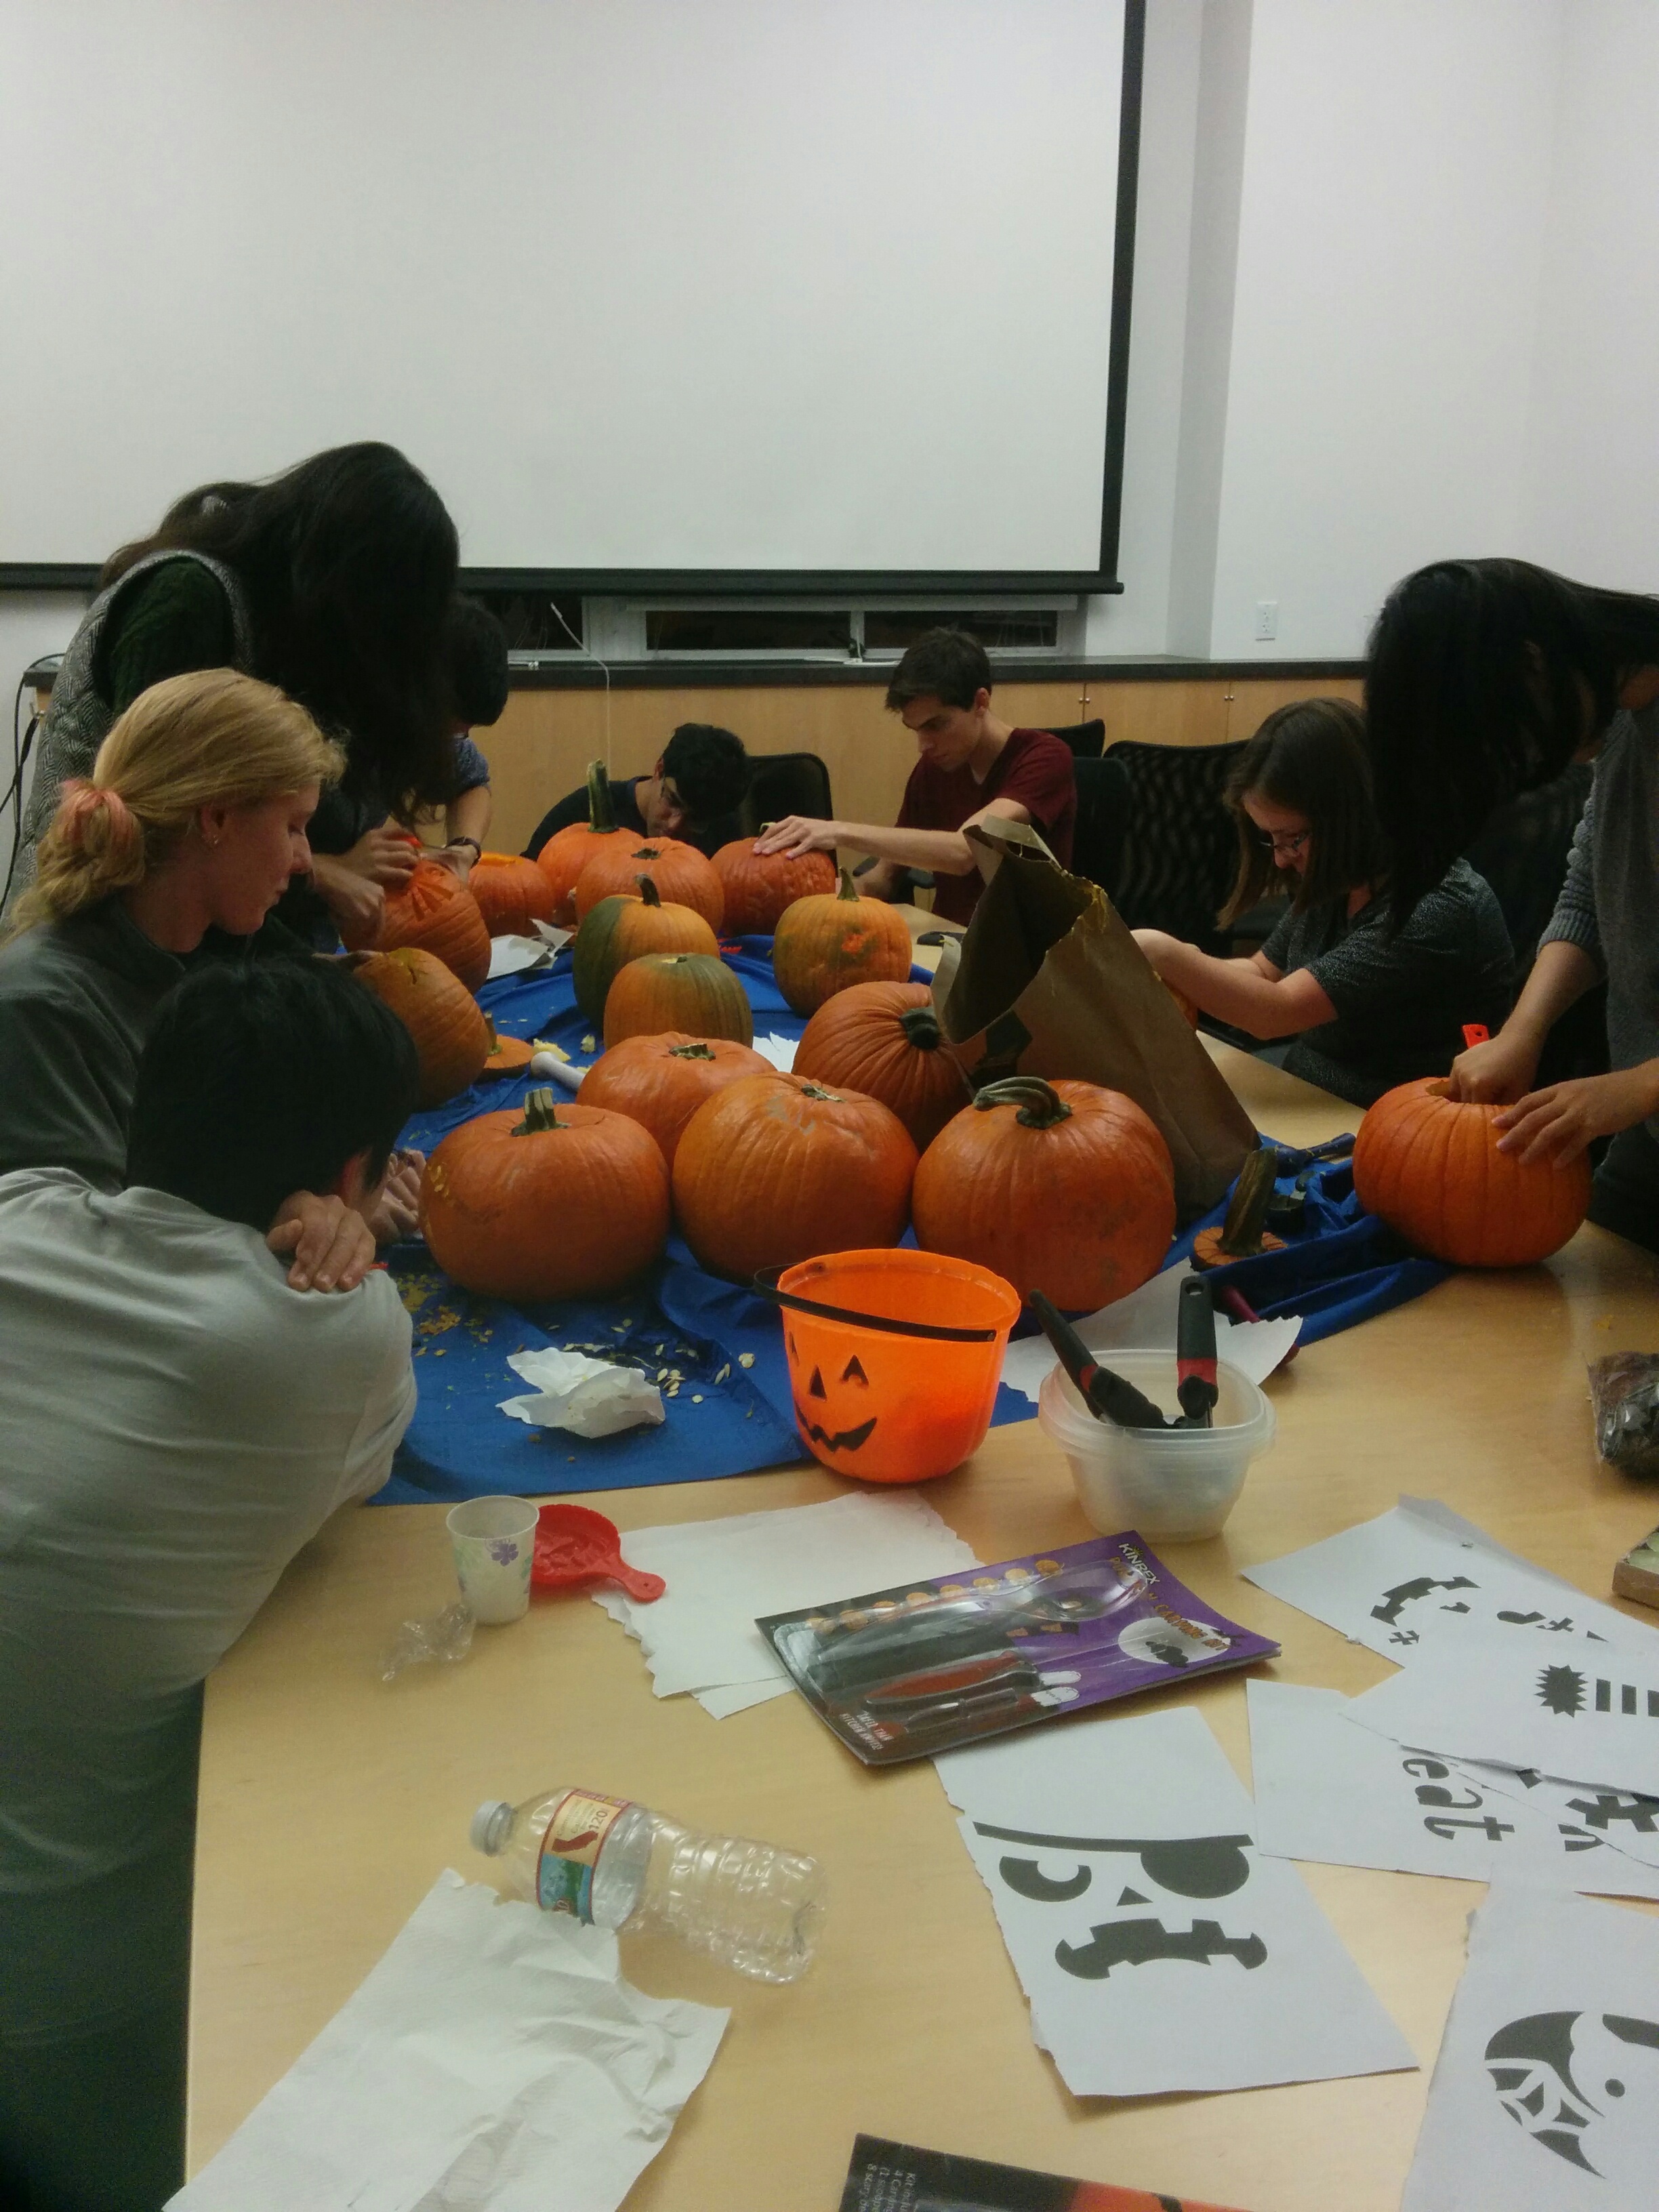 Preparing for Halloween with a pumpkin carving social activity